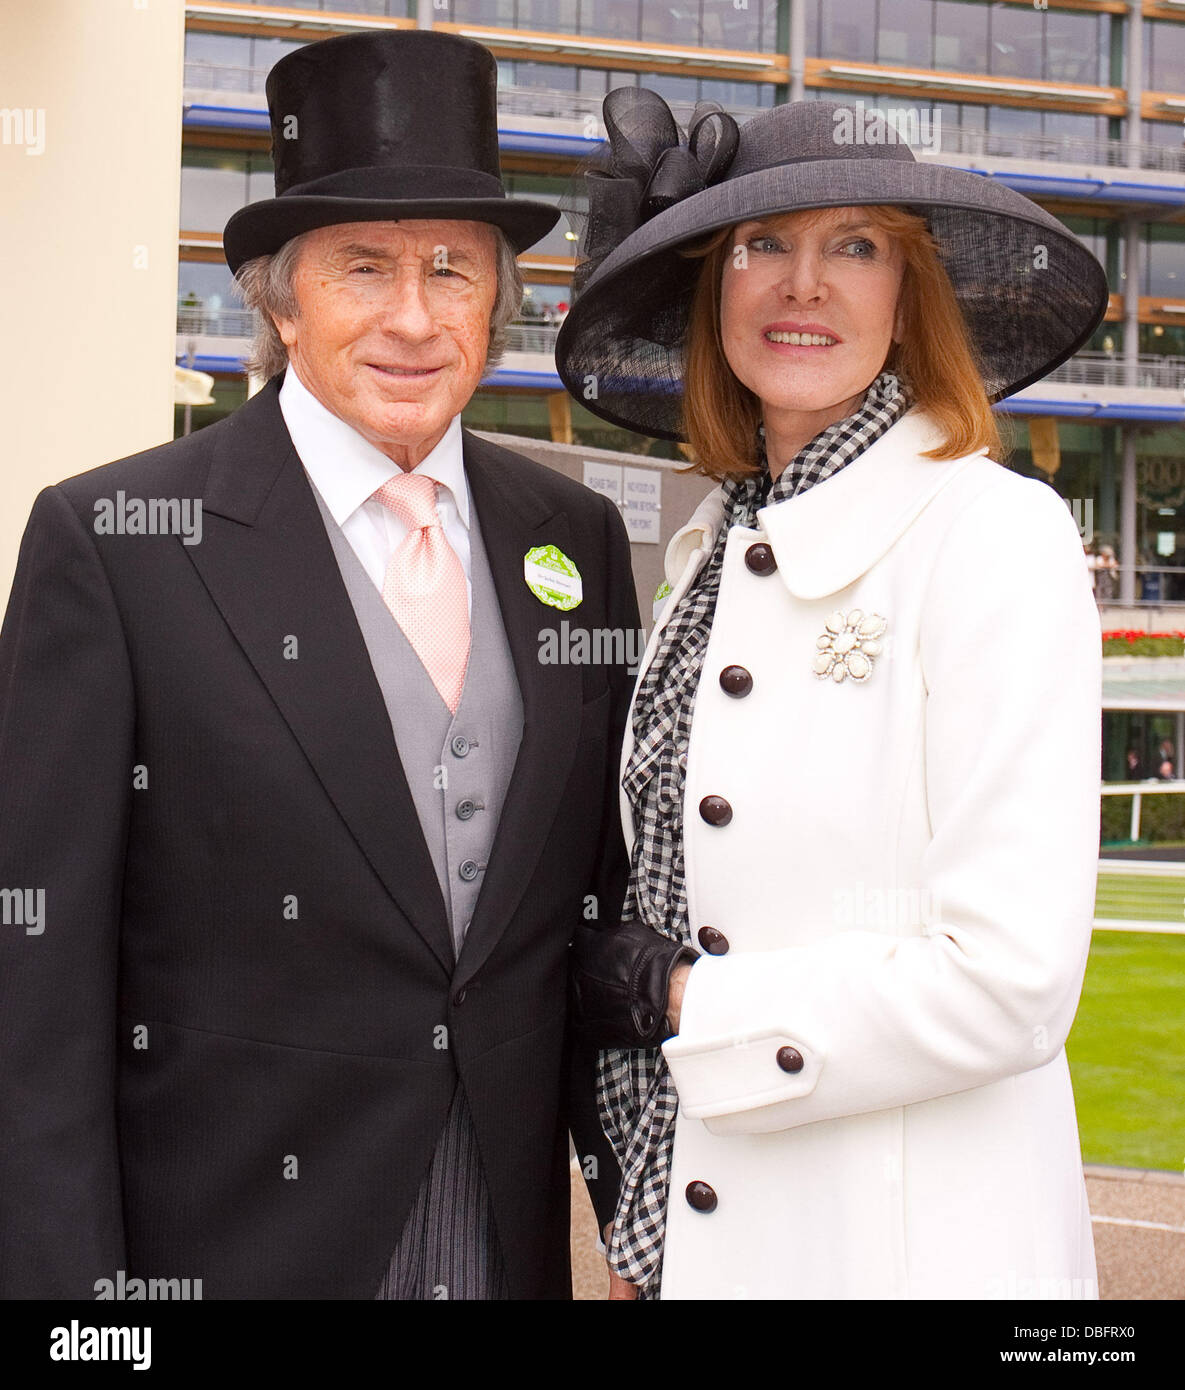 Sir Jackie Stewart and wife Royal Ascot at Ascot Racecourse - Day 2 Berkshire, England - 15.06.11 Stock Photo